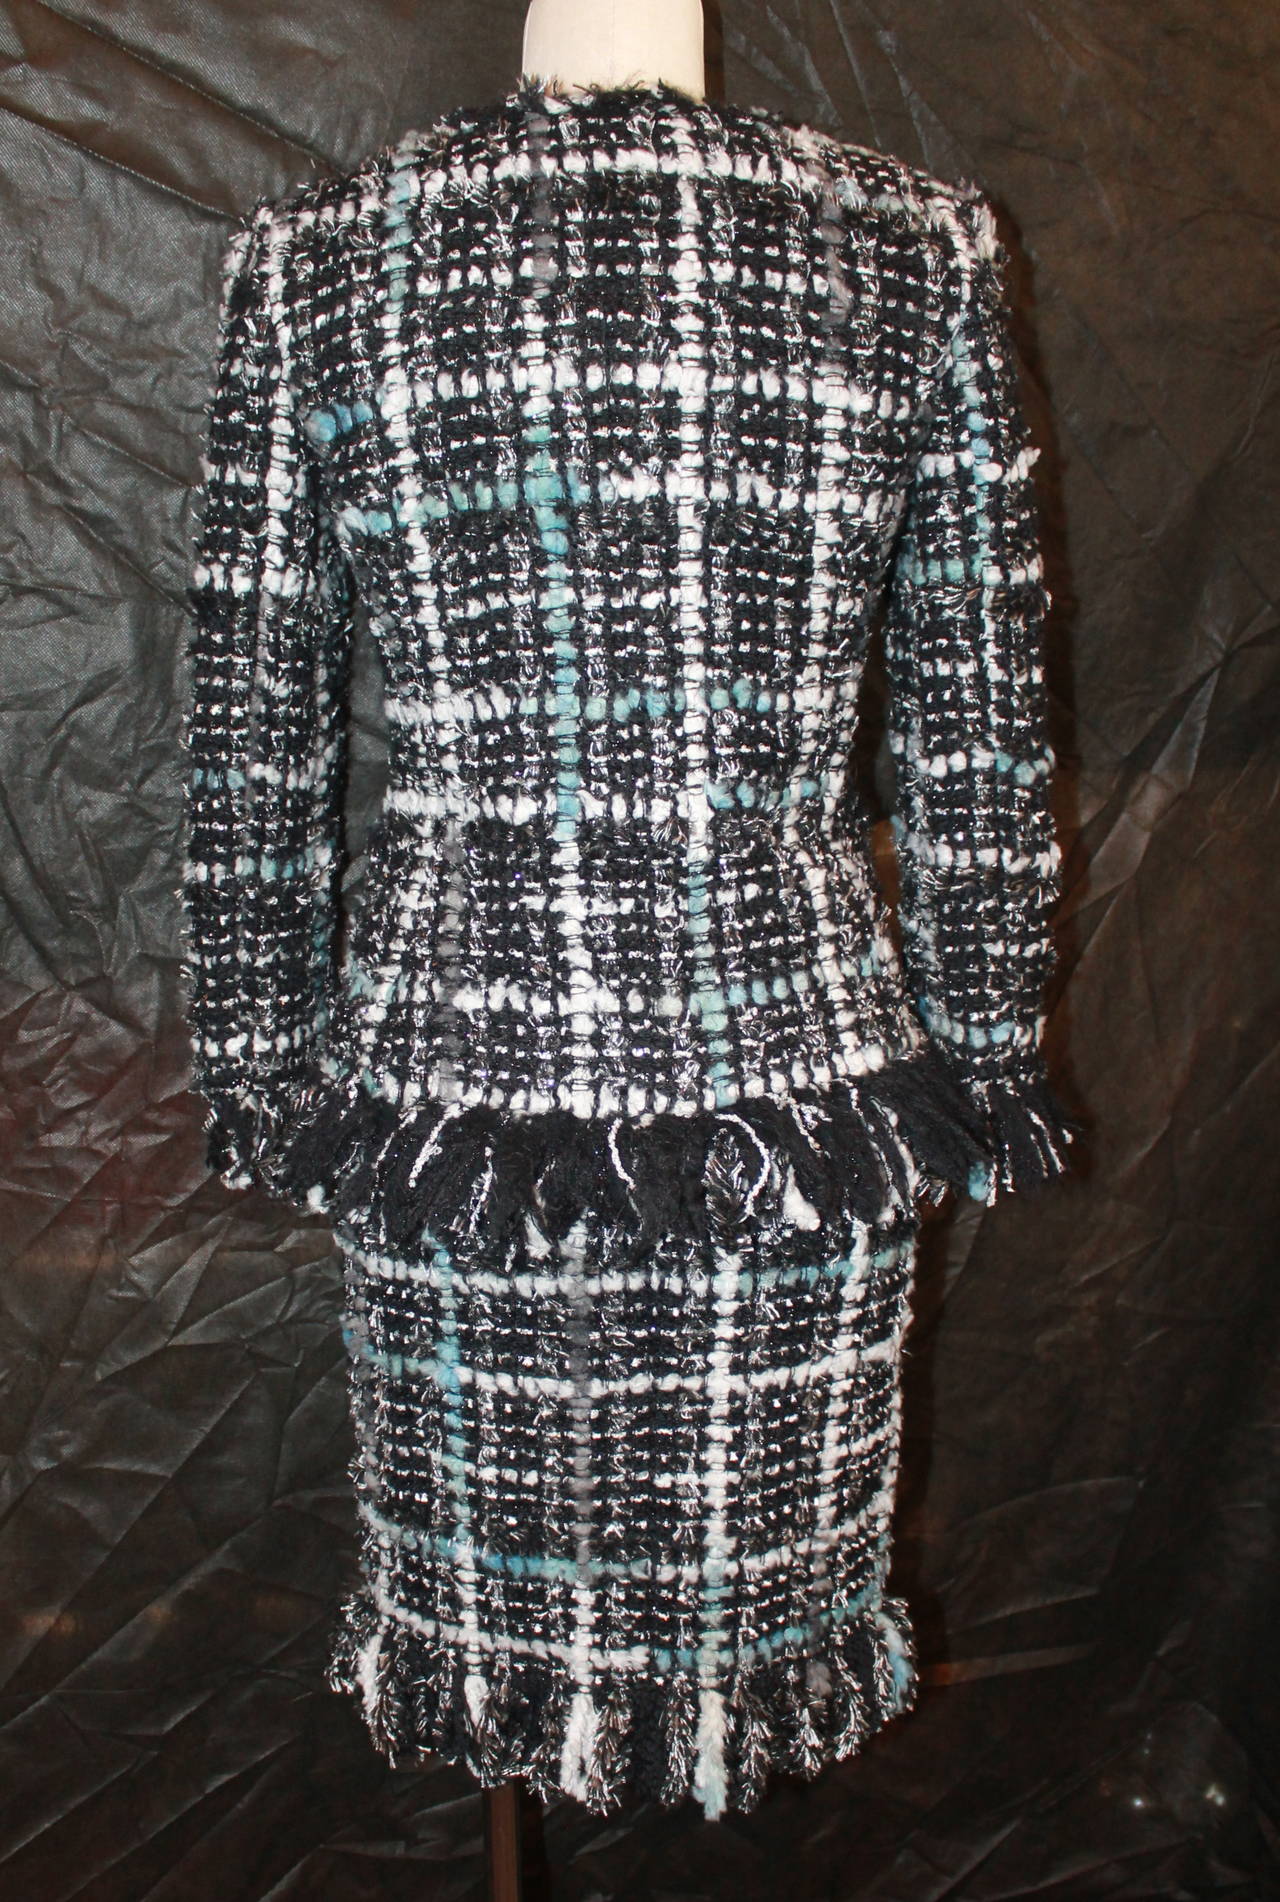 Women's Chanel Blue, Silver, Black Tweed Skirt Suit with Fringe - 34 - cc 2013